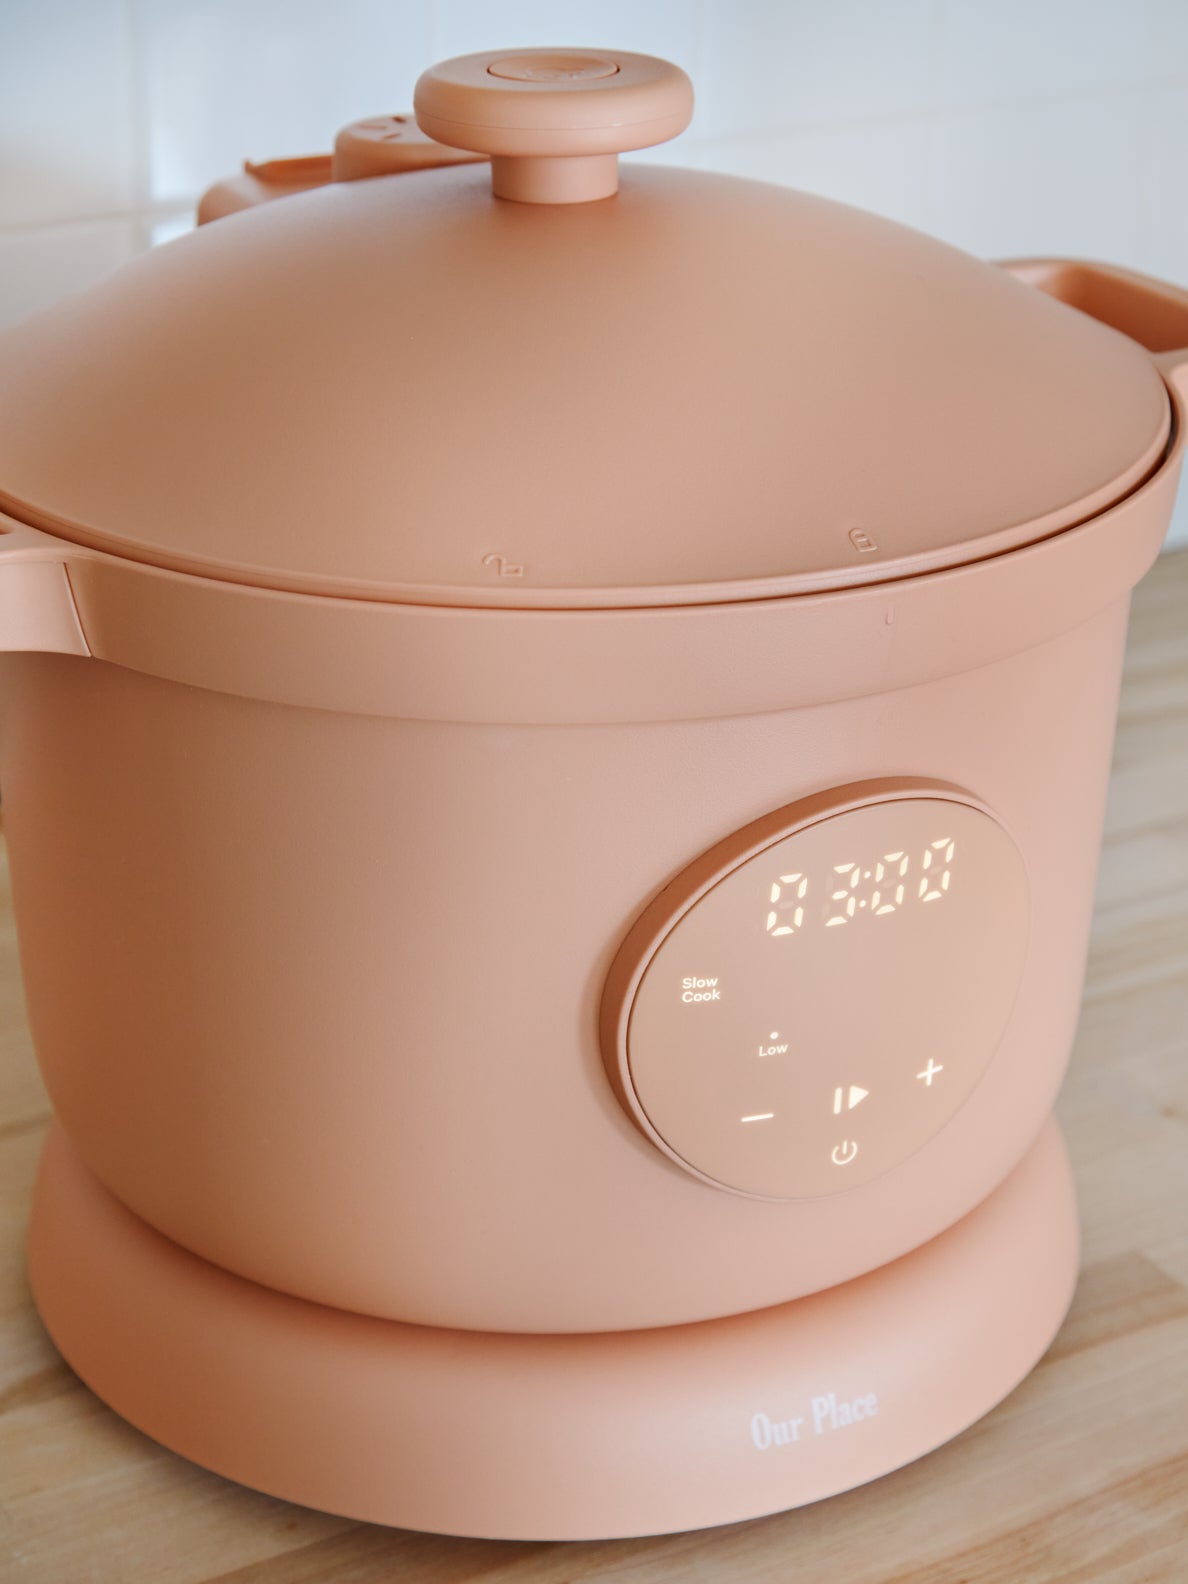 Slow-Cooker-Review-Domino-06